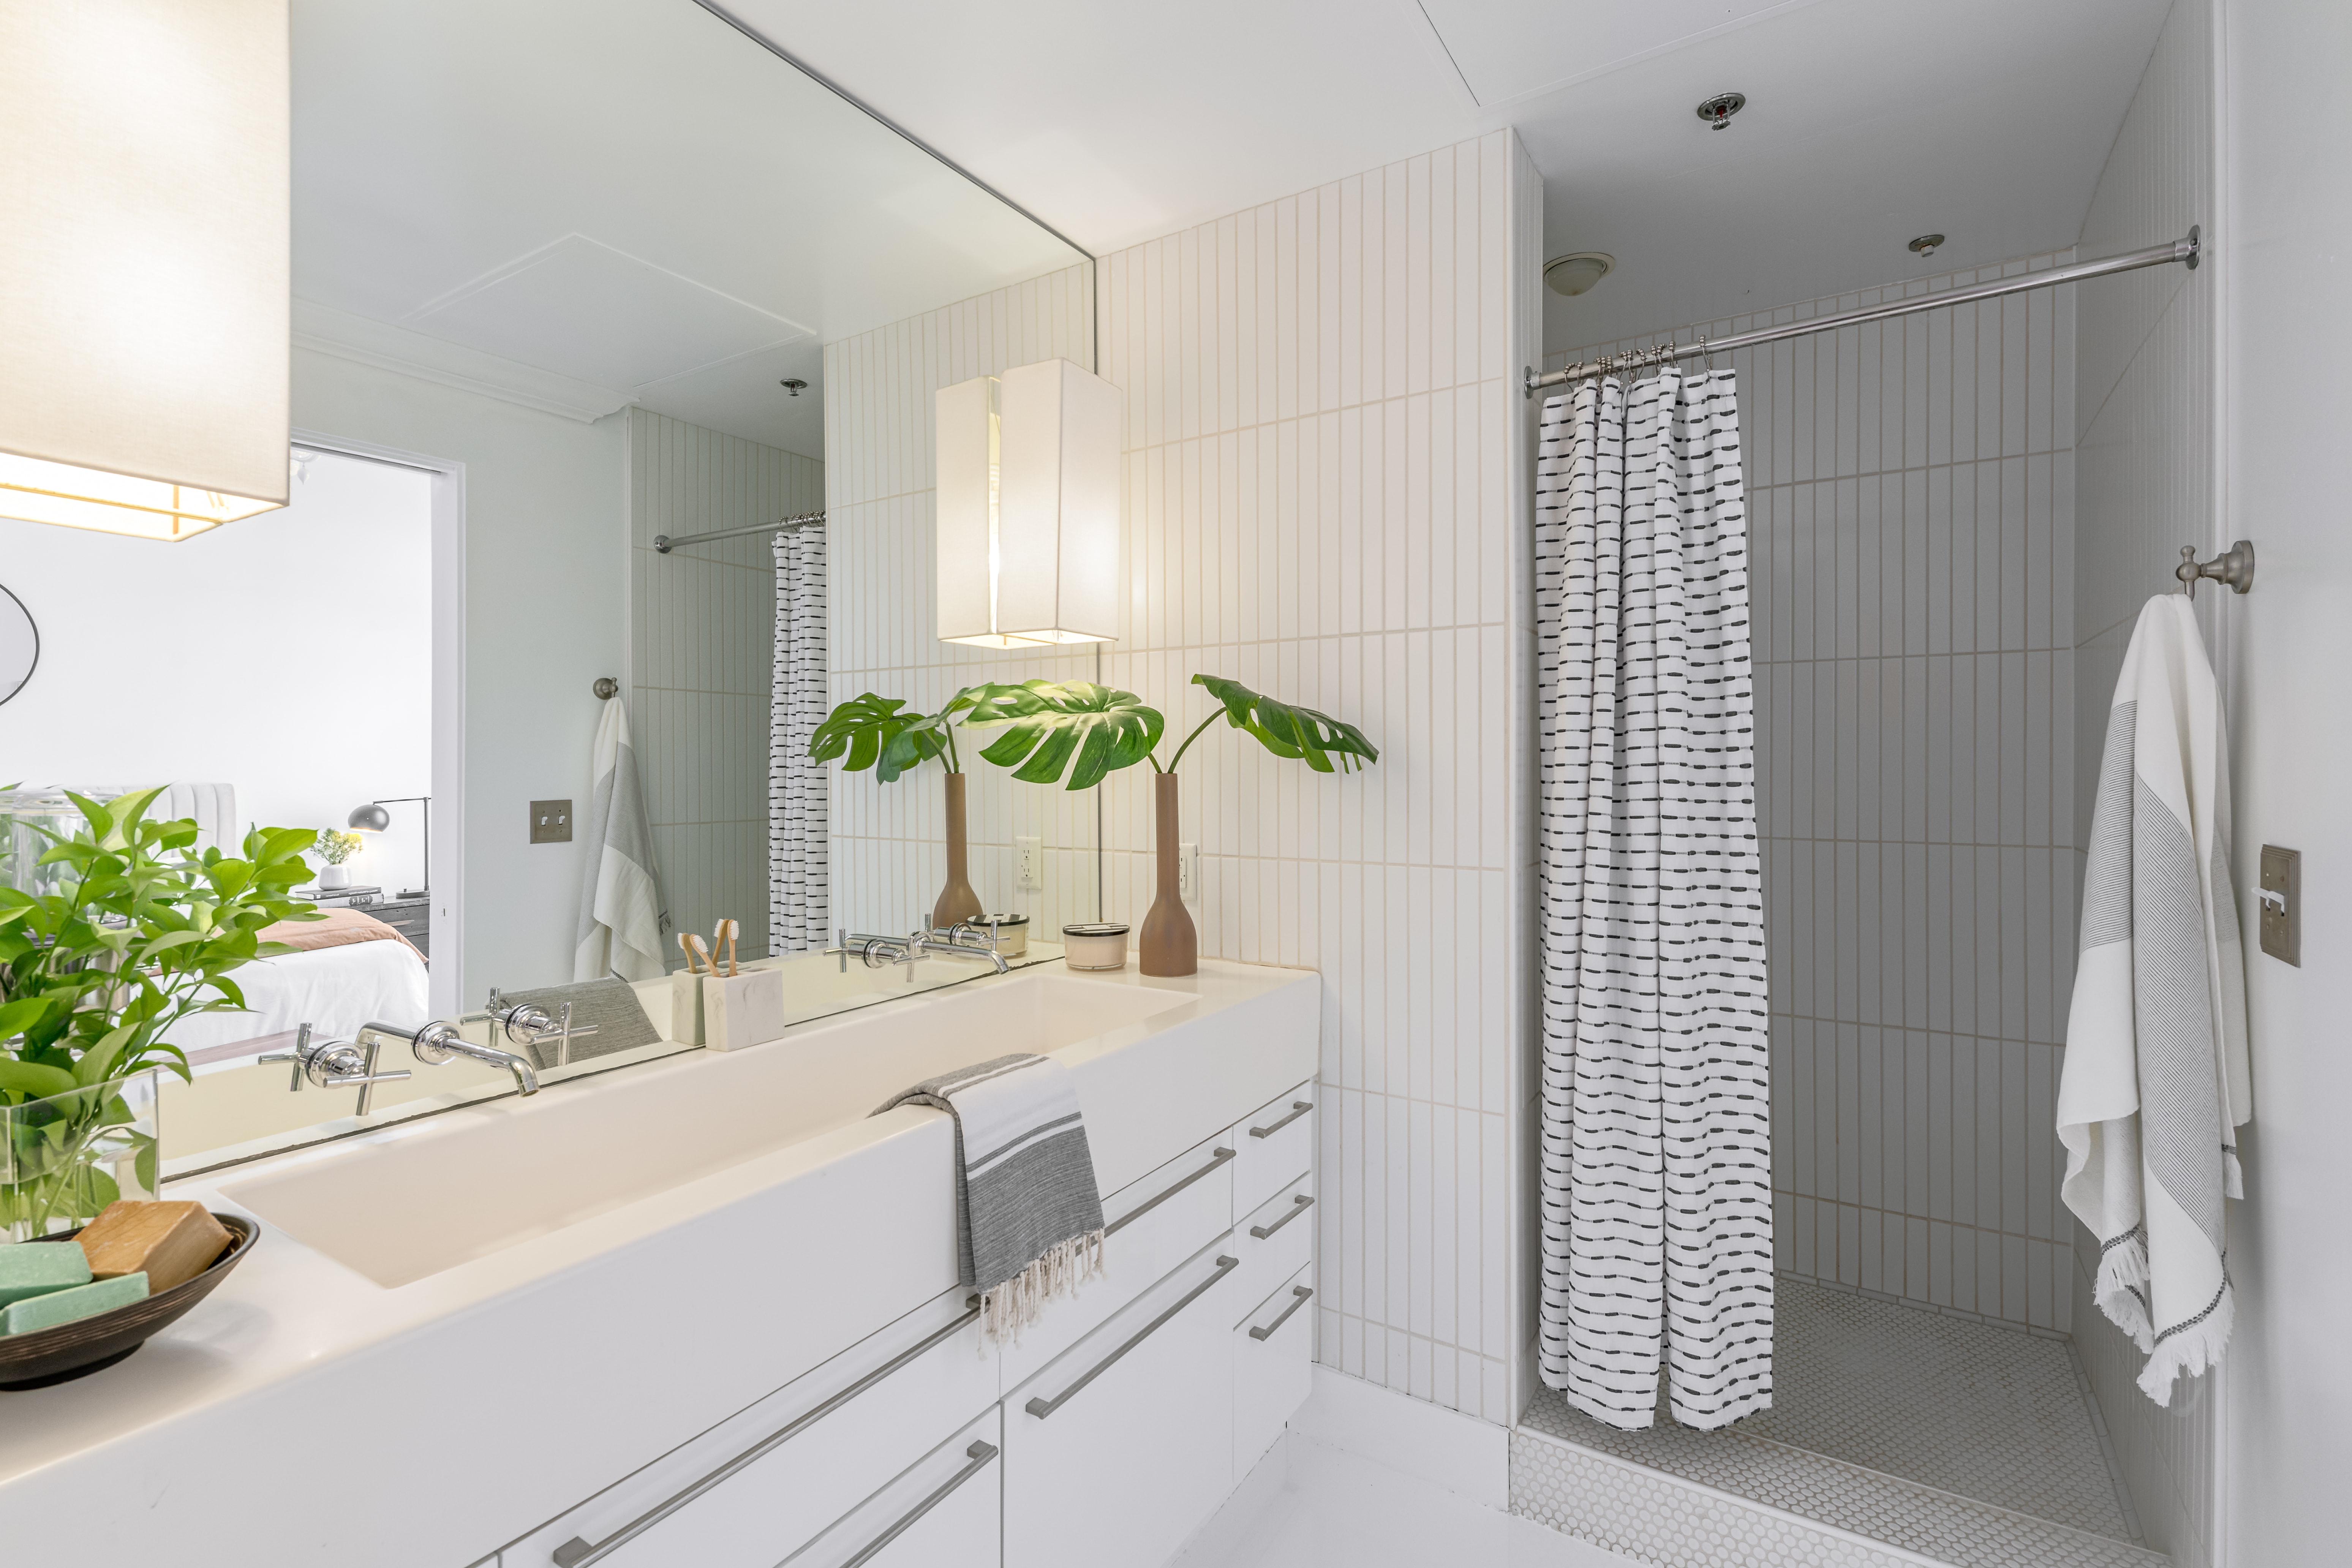 Sleek lines, oversized vanity, and white tiles in this primary bath.